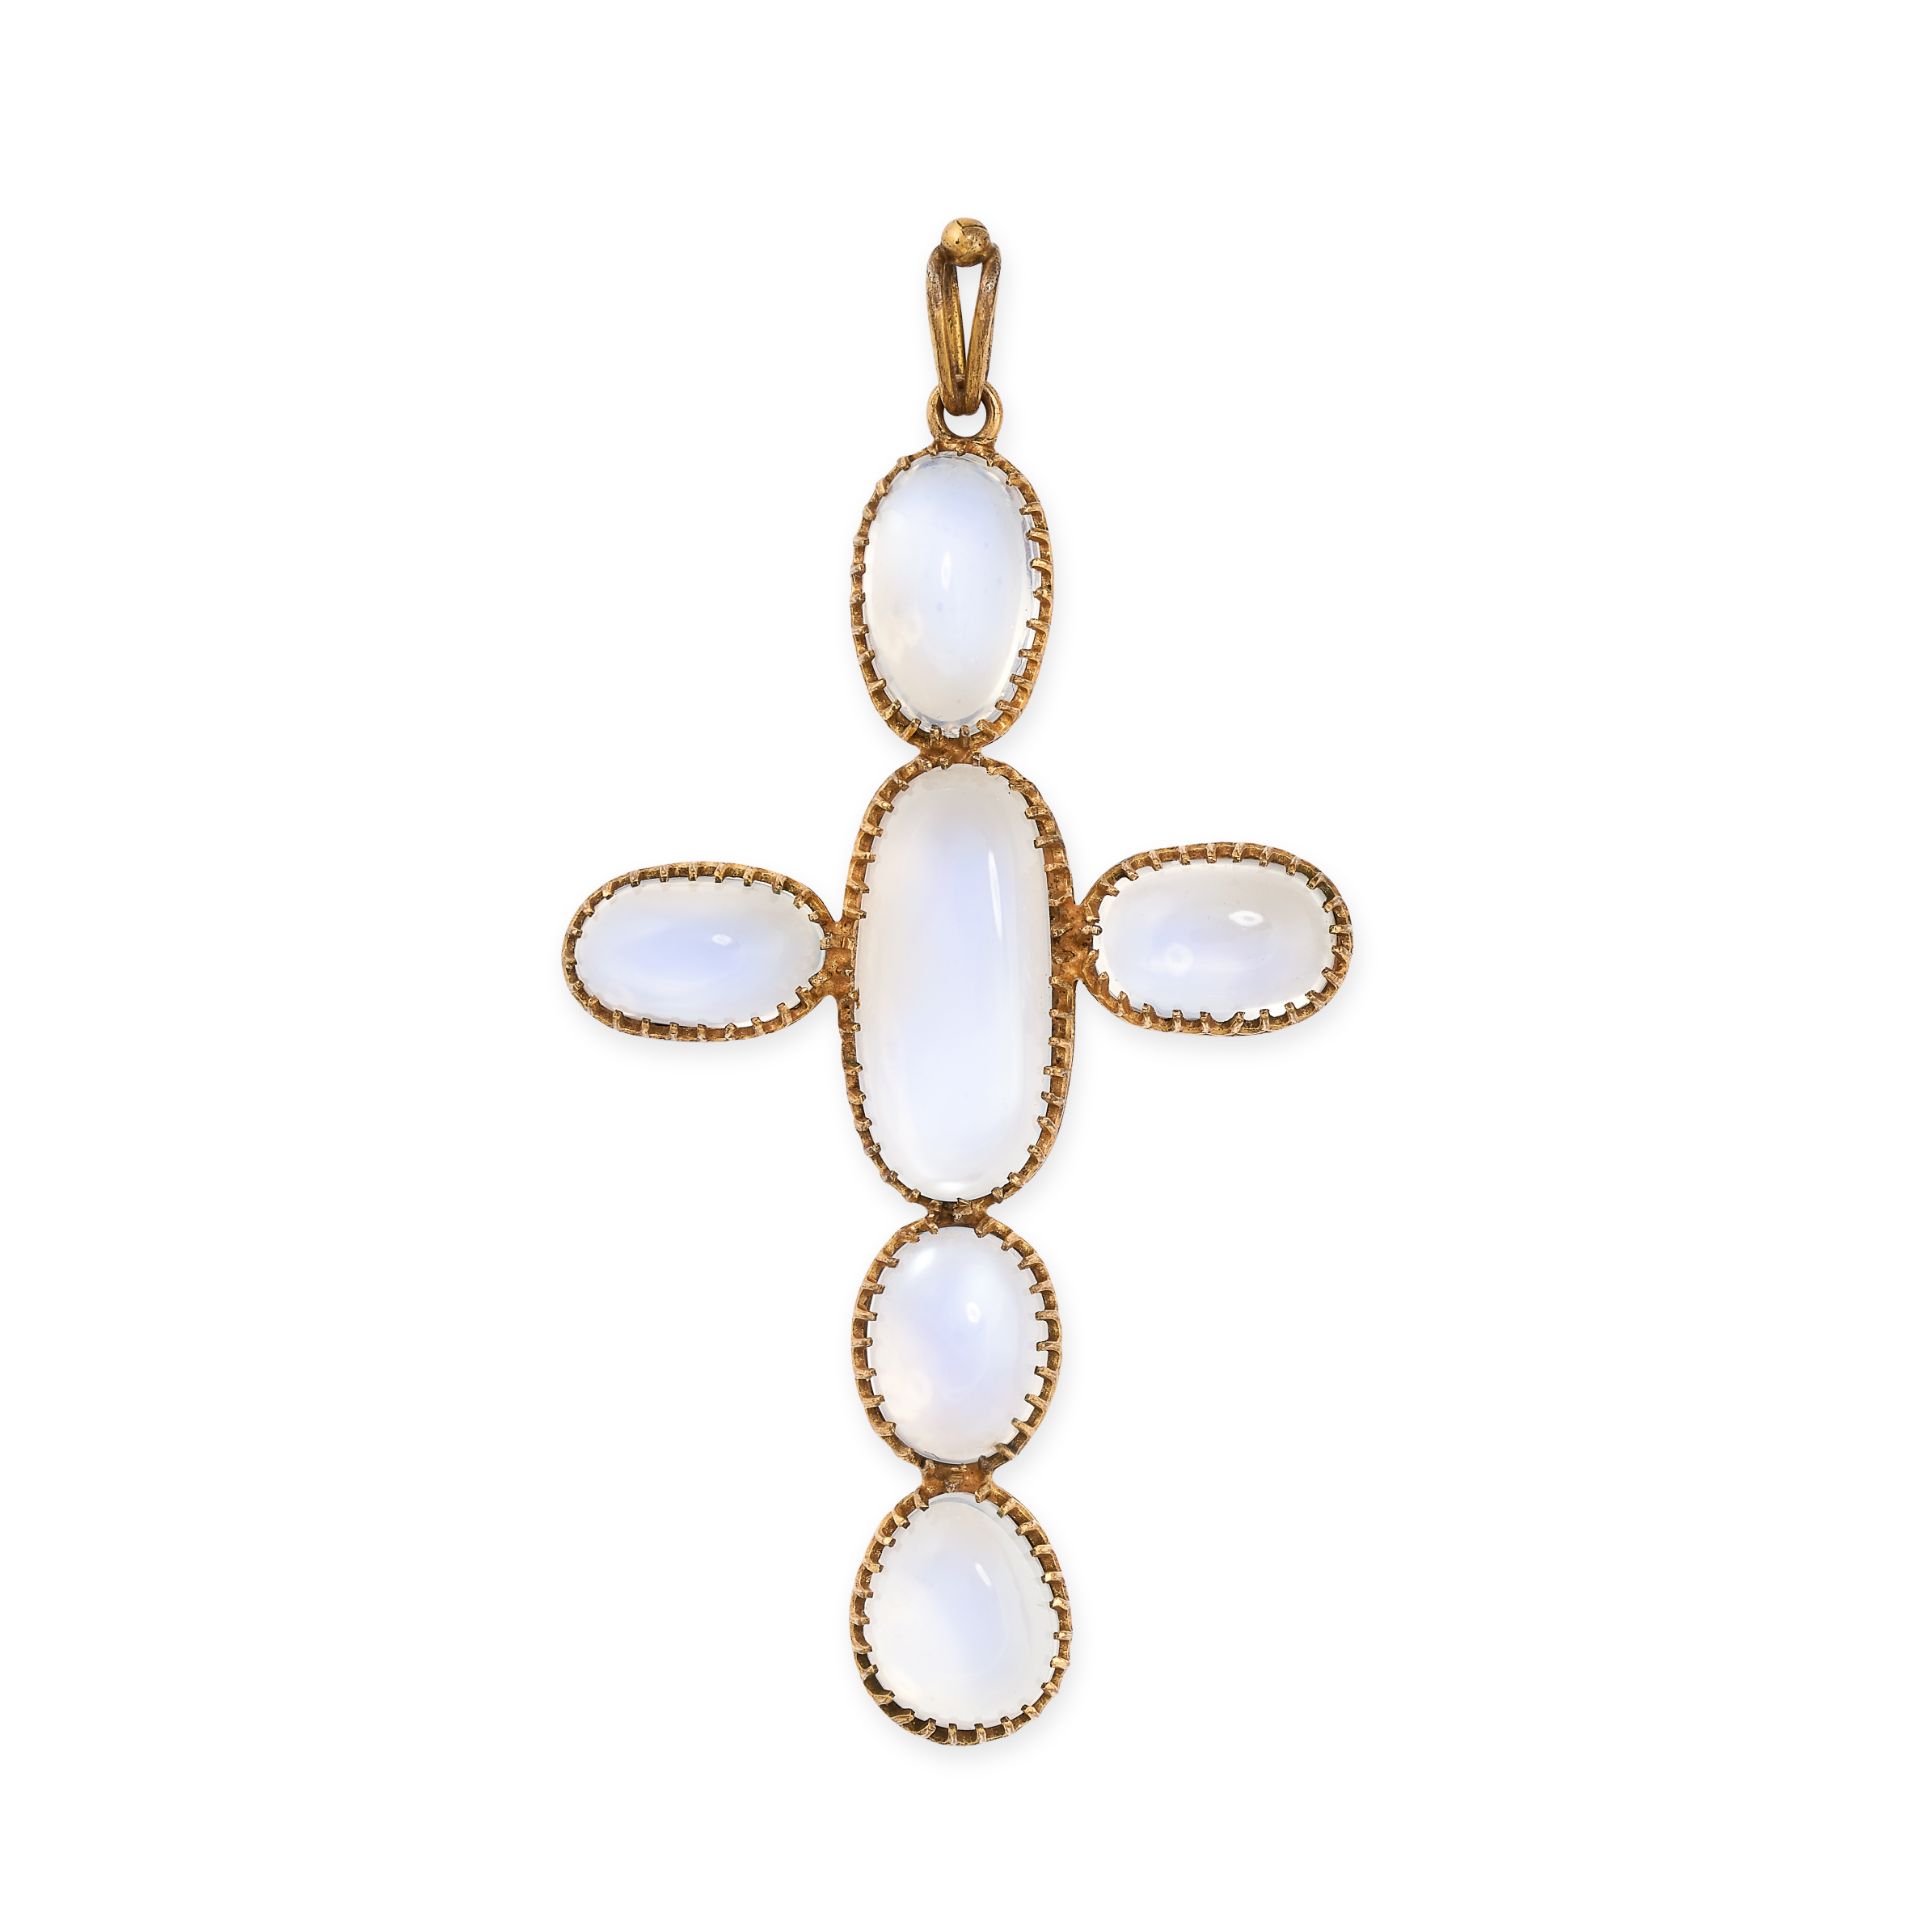 AN ANTIQUE MOONSTONE CROSS PENDANT in yellow gold, set with six oval cabochon moonstones, no assay